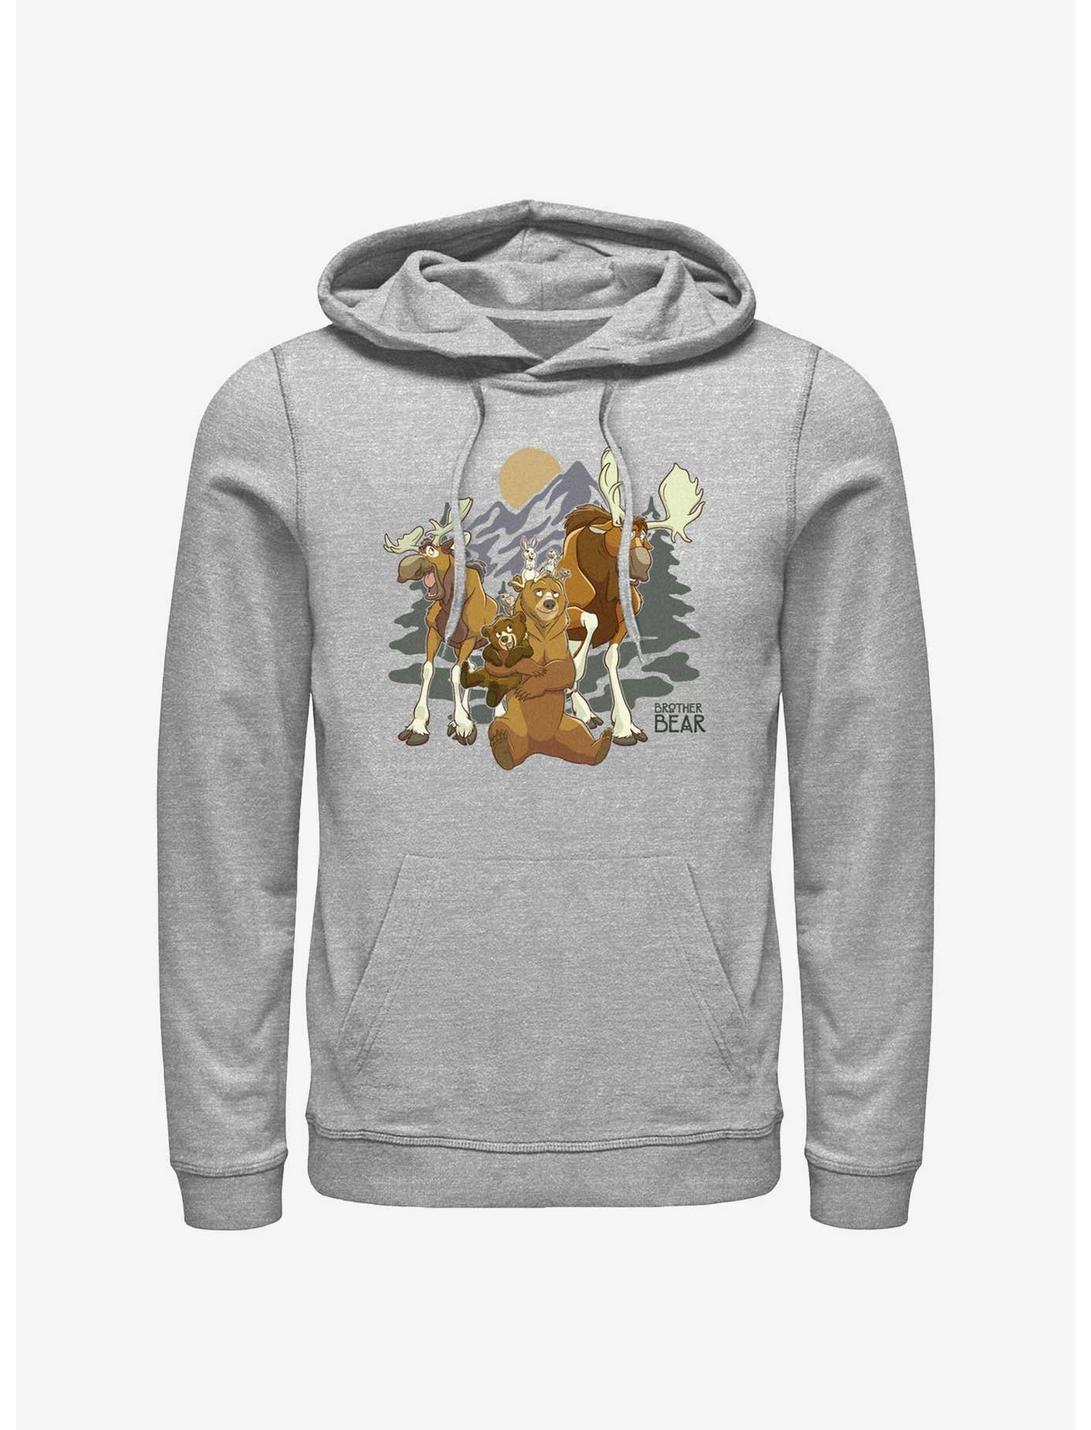 Disney Brother Bear Rutt and Tuke Moose Brothers Hoodie, ATH HTR, hi-res